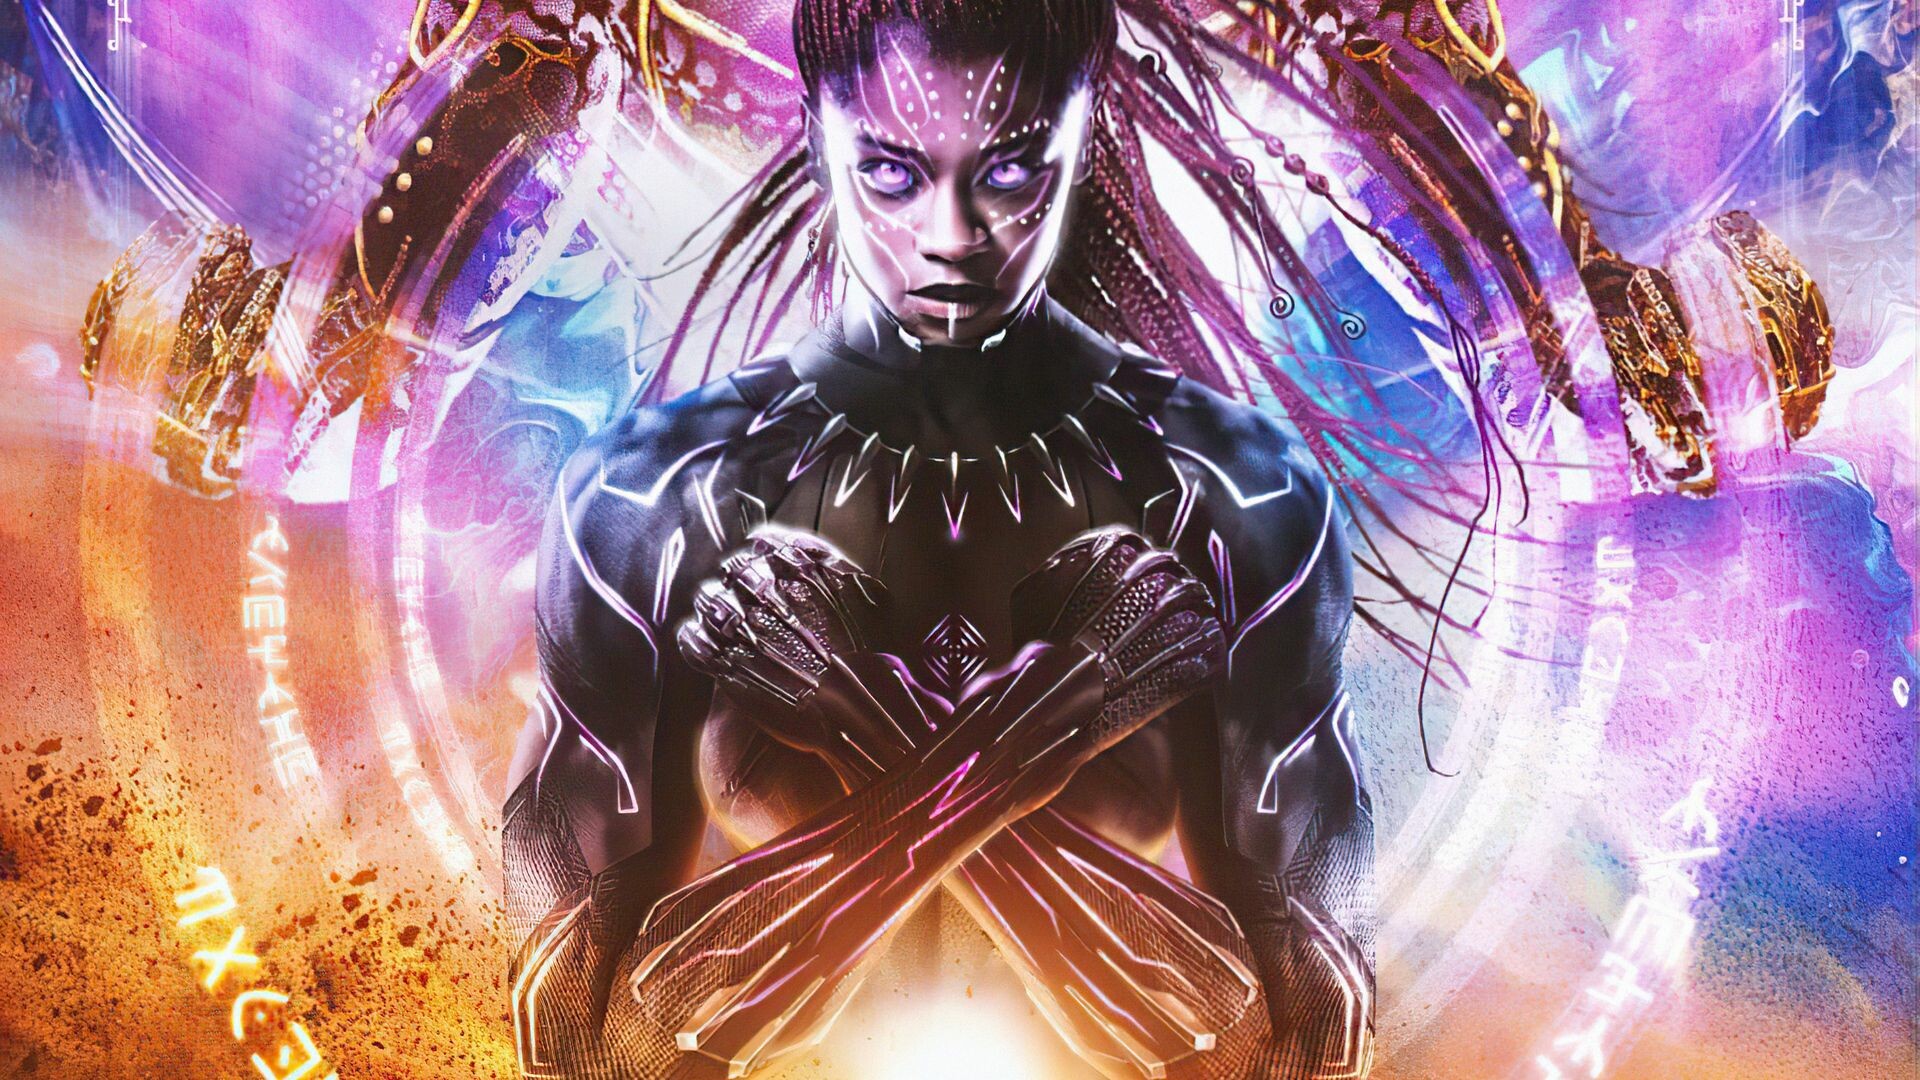 Black Panther: Wakanda Forever: The courageous and tech-savvy younger sister of T'Challa. 1920x1080 Full HD Wallpaper.